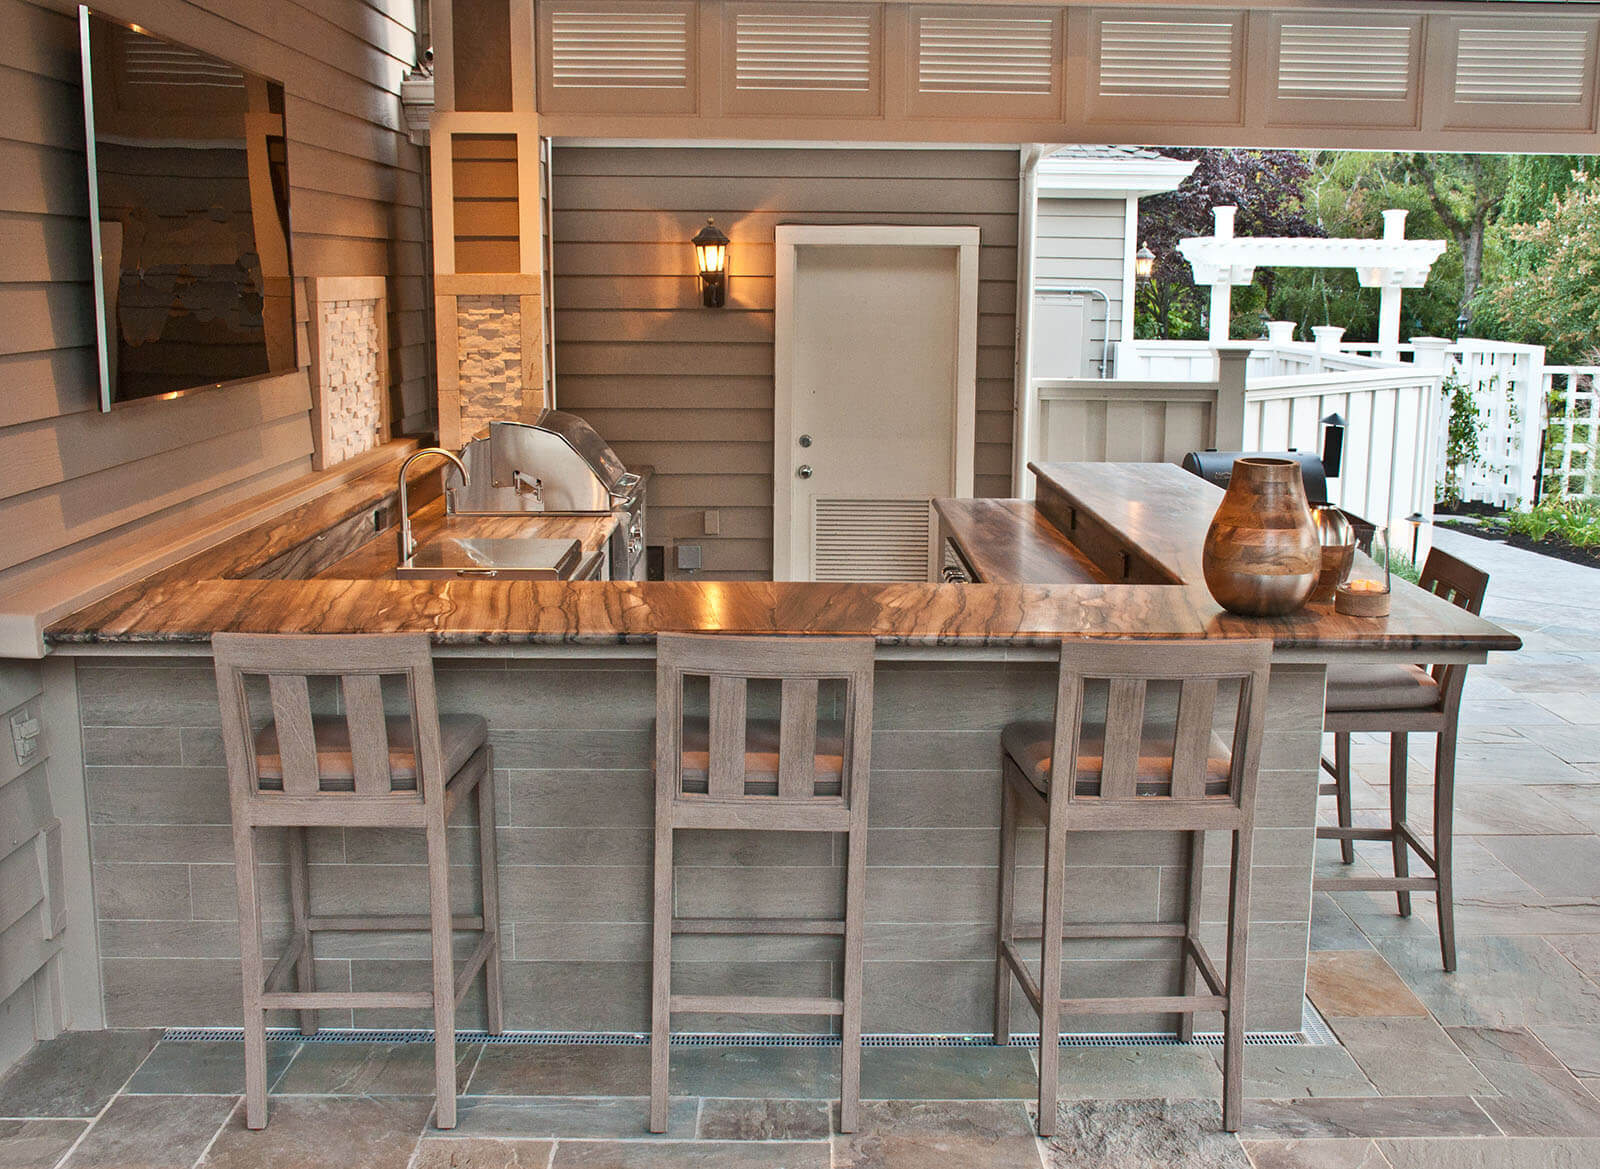 Covered outdoor kitchen with marble counters, grill, sink, and bar seating in a contemporary farmhouse style